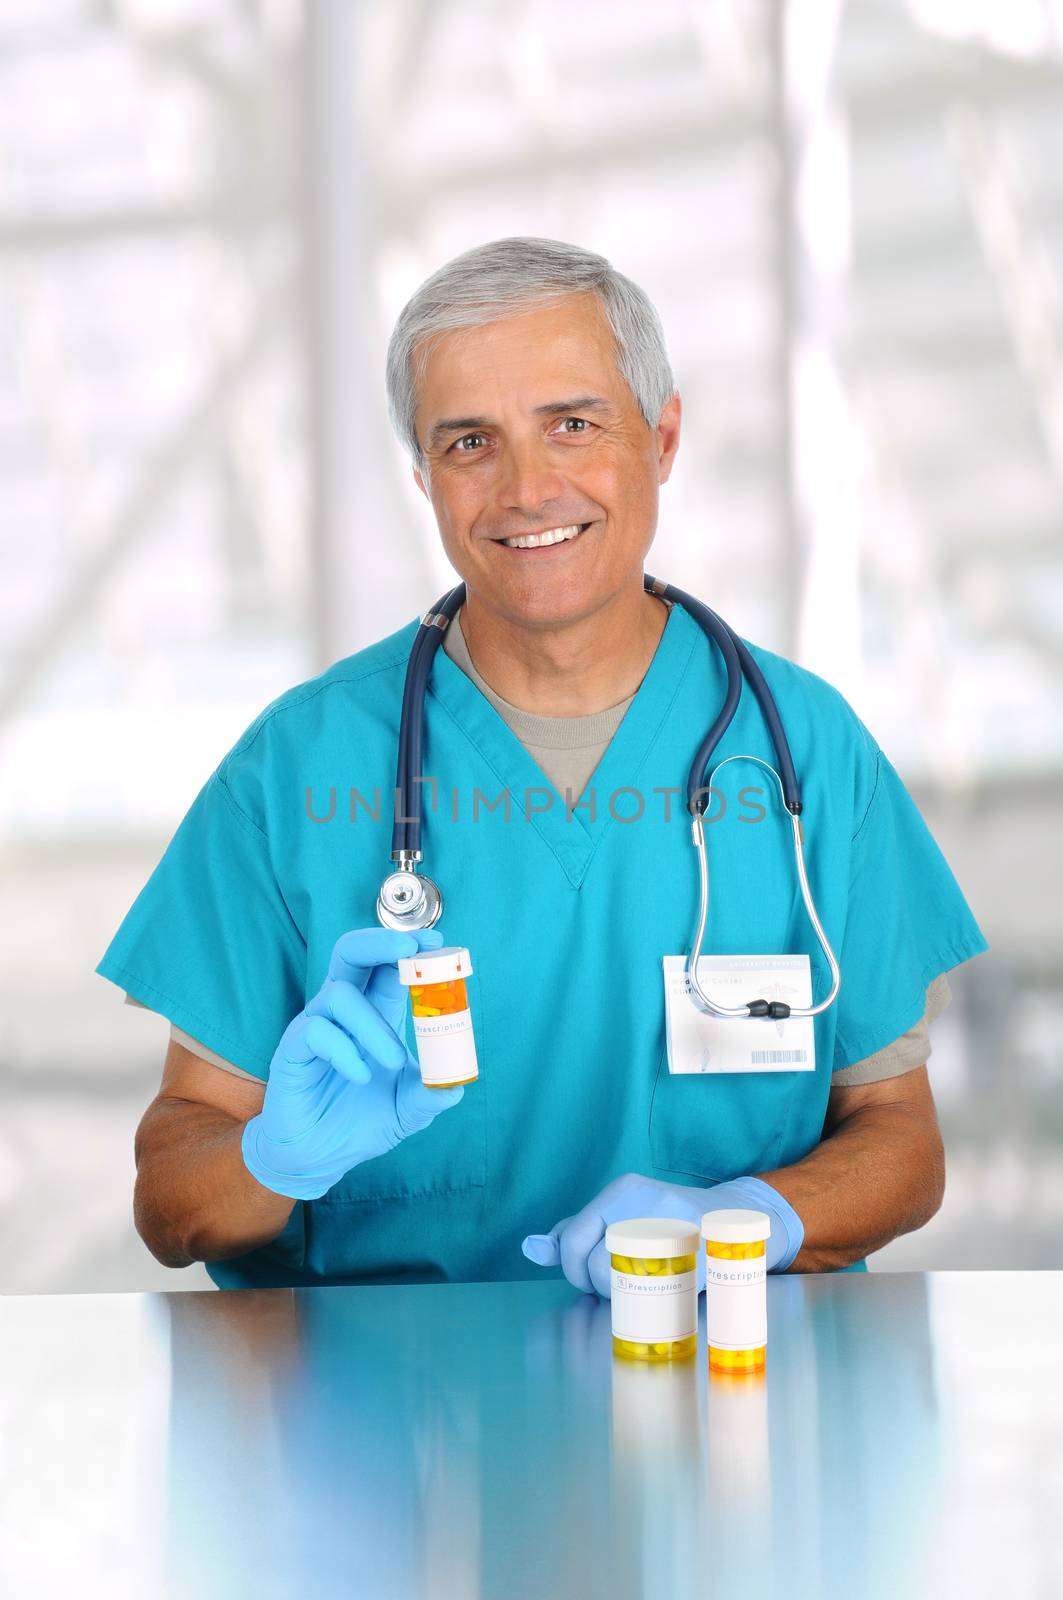 Doctor holding prescription medicine bottle in modern medical facility. Man is wearing scrubs and stethoscope. Vertical format.